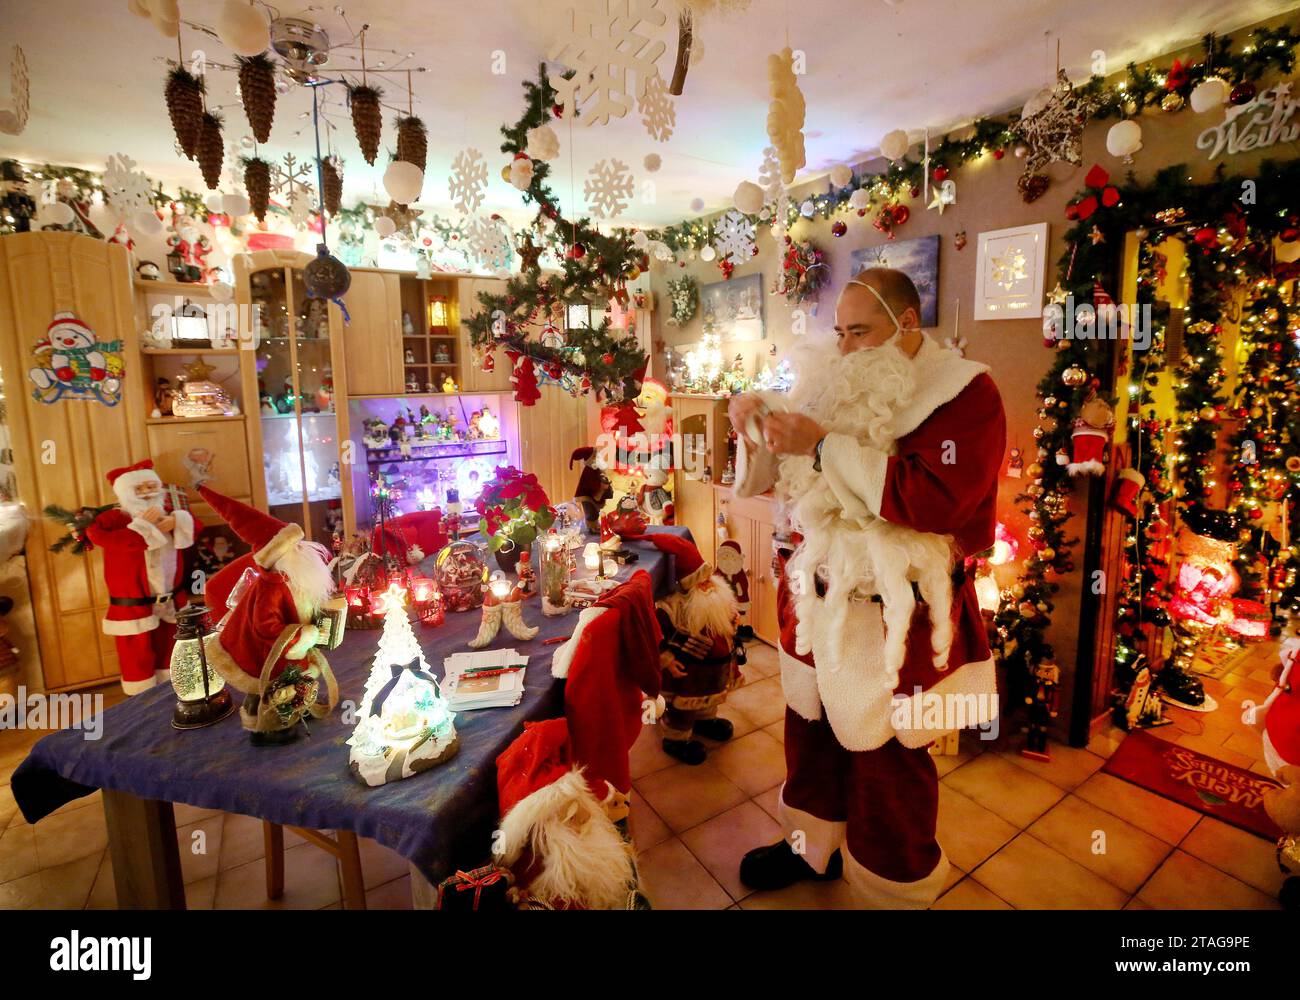 Oberhausen, Germany. 29th Nov, 2023. Dirk van Acken, a geriatric nurse and Christmas fanatic, dresses up as Santa Claus in his decorated house. Around 70,000 lights are lit up around the house and inside there is a veritable frenzy of decorations: nutcrackers, reindeer, mini Christmas houses, countless figures and Christmas knick-knacks. Credit: Roland Weihrauch/dpa/Alamy Live News Stock Photo